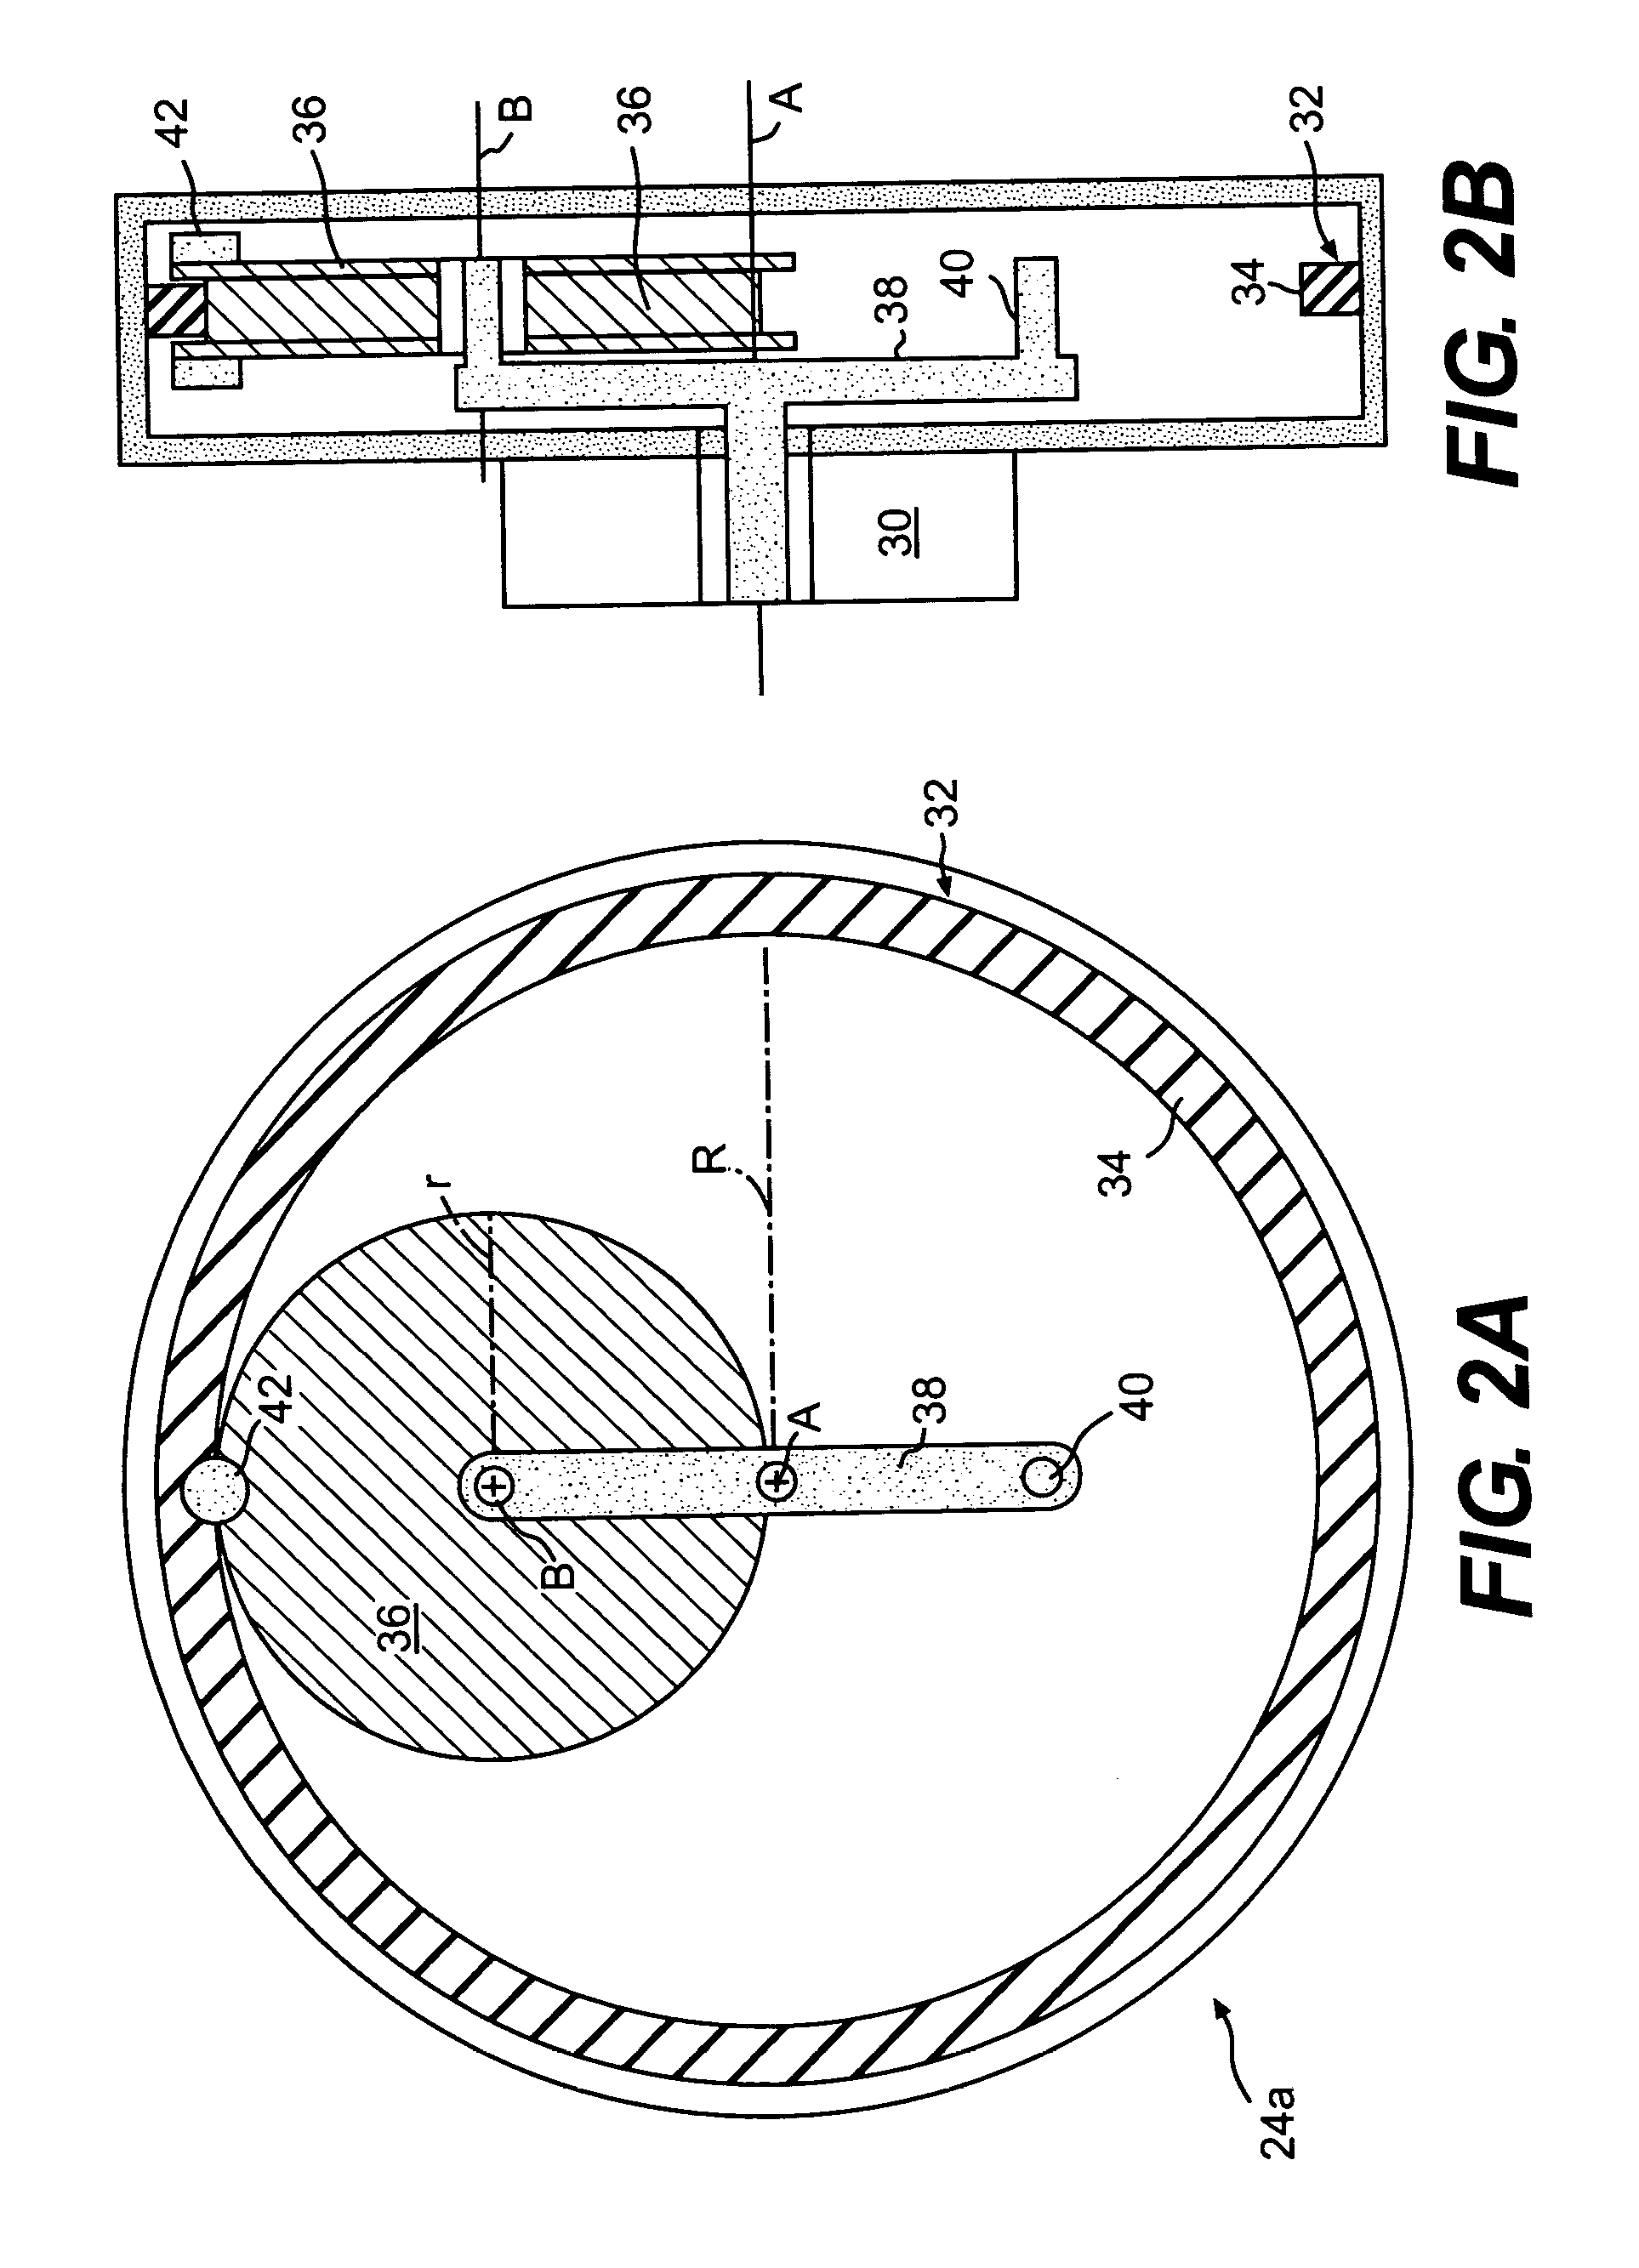 Harmonic force generator for an active vibration control system